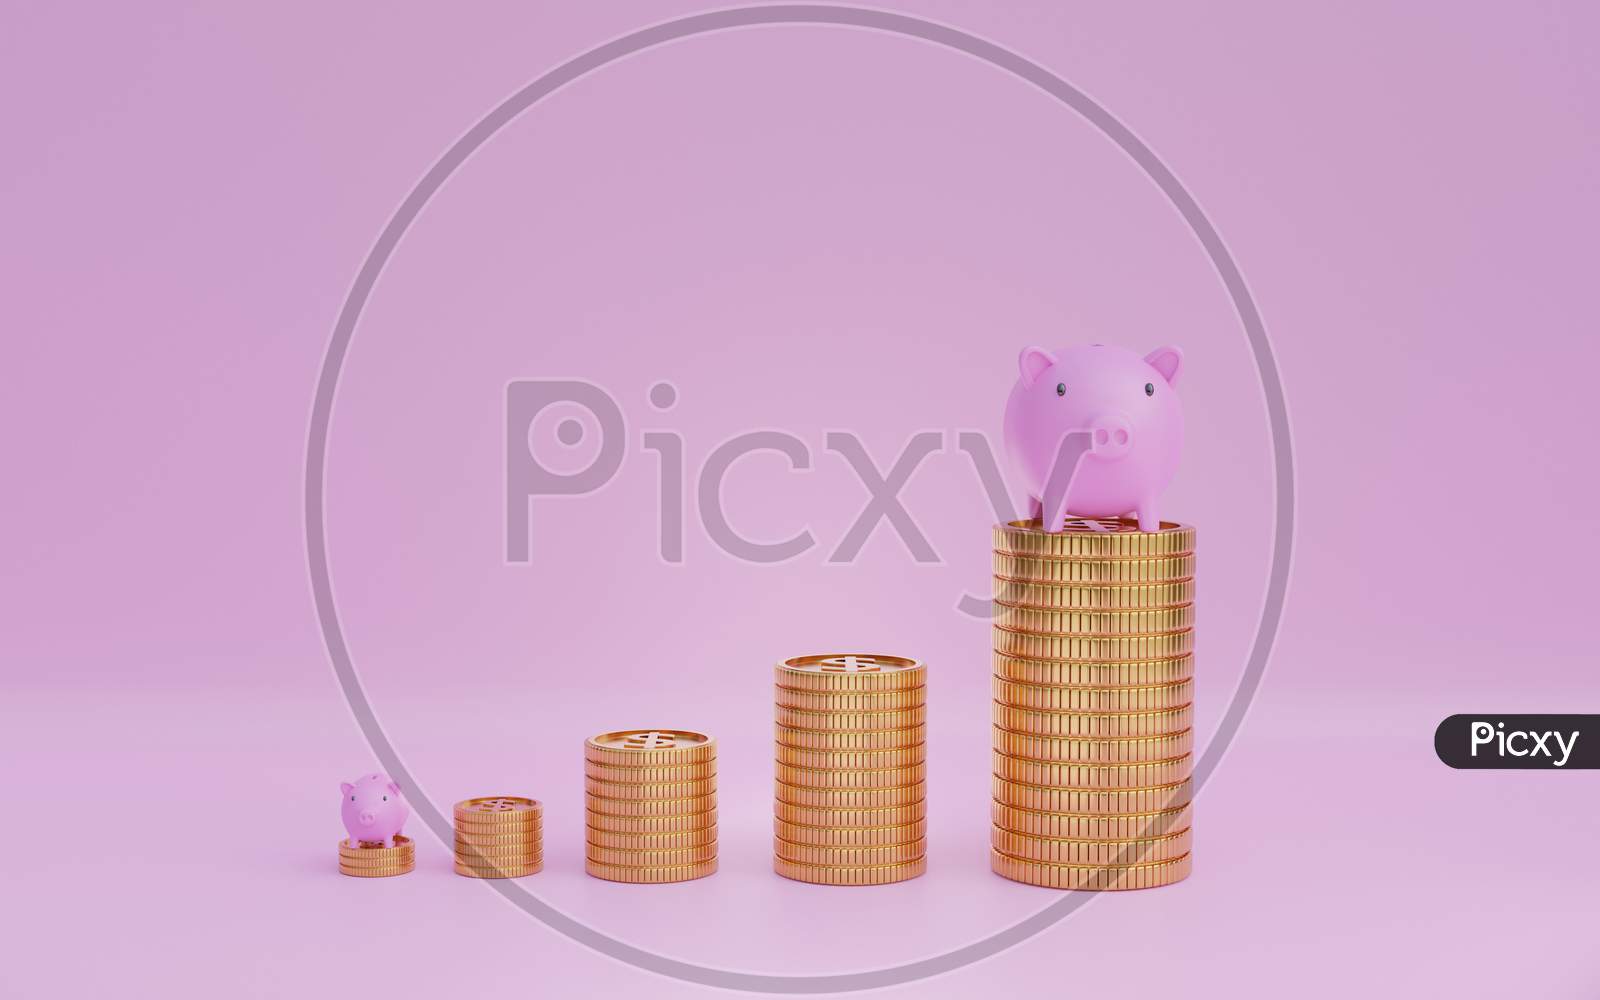 3D Render Image Of Coin Stacks With Piggy Bank, Concept Of Saving Or Investment